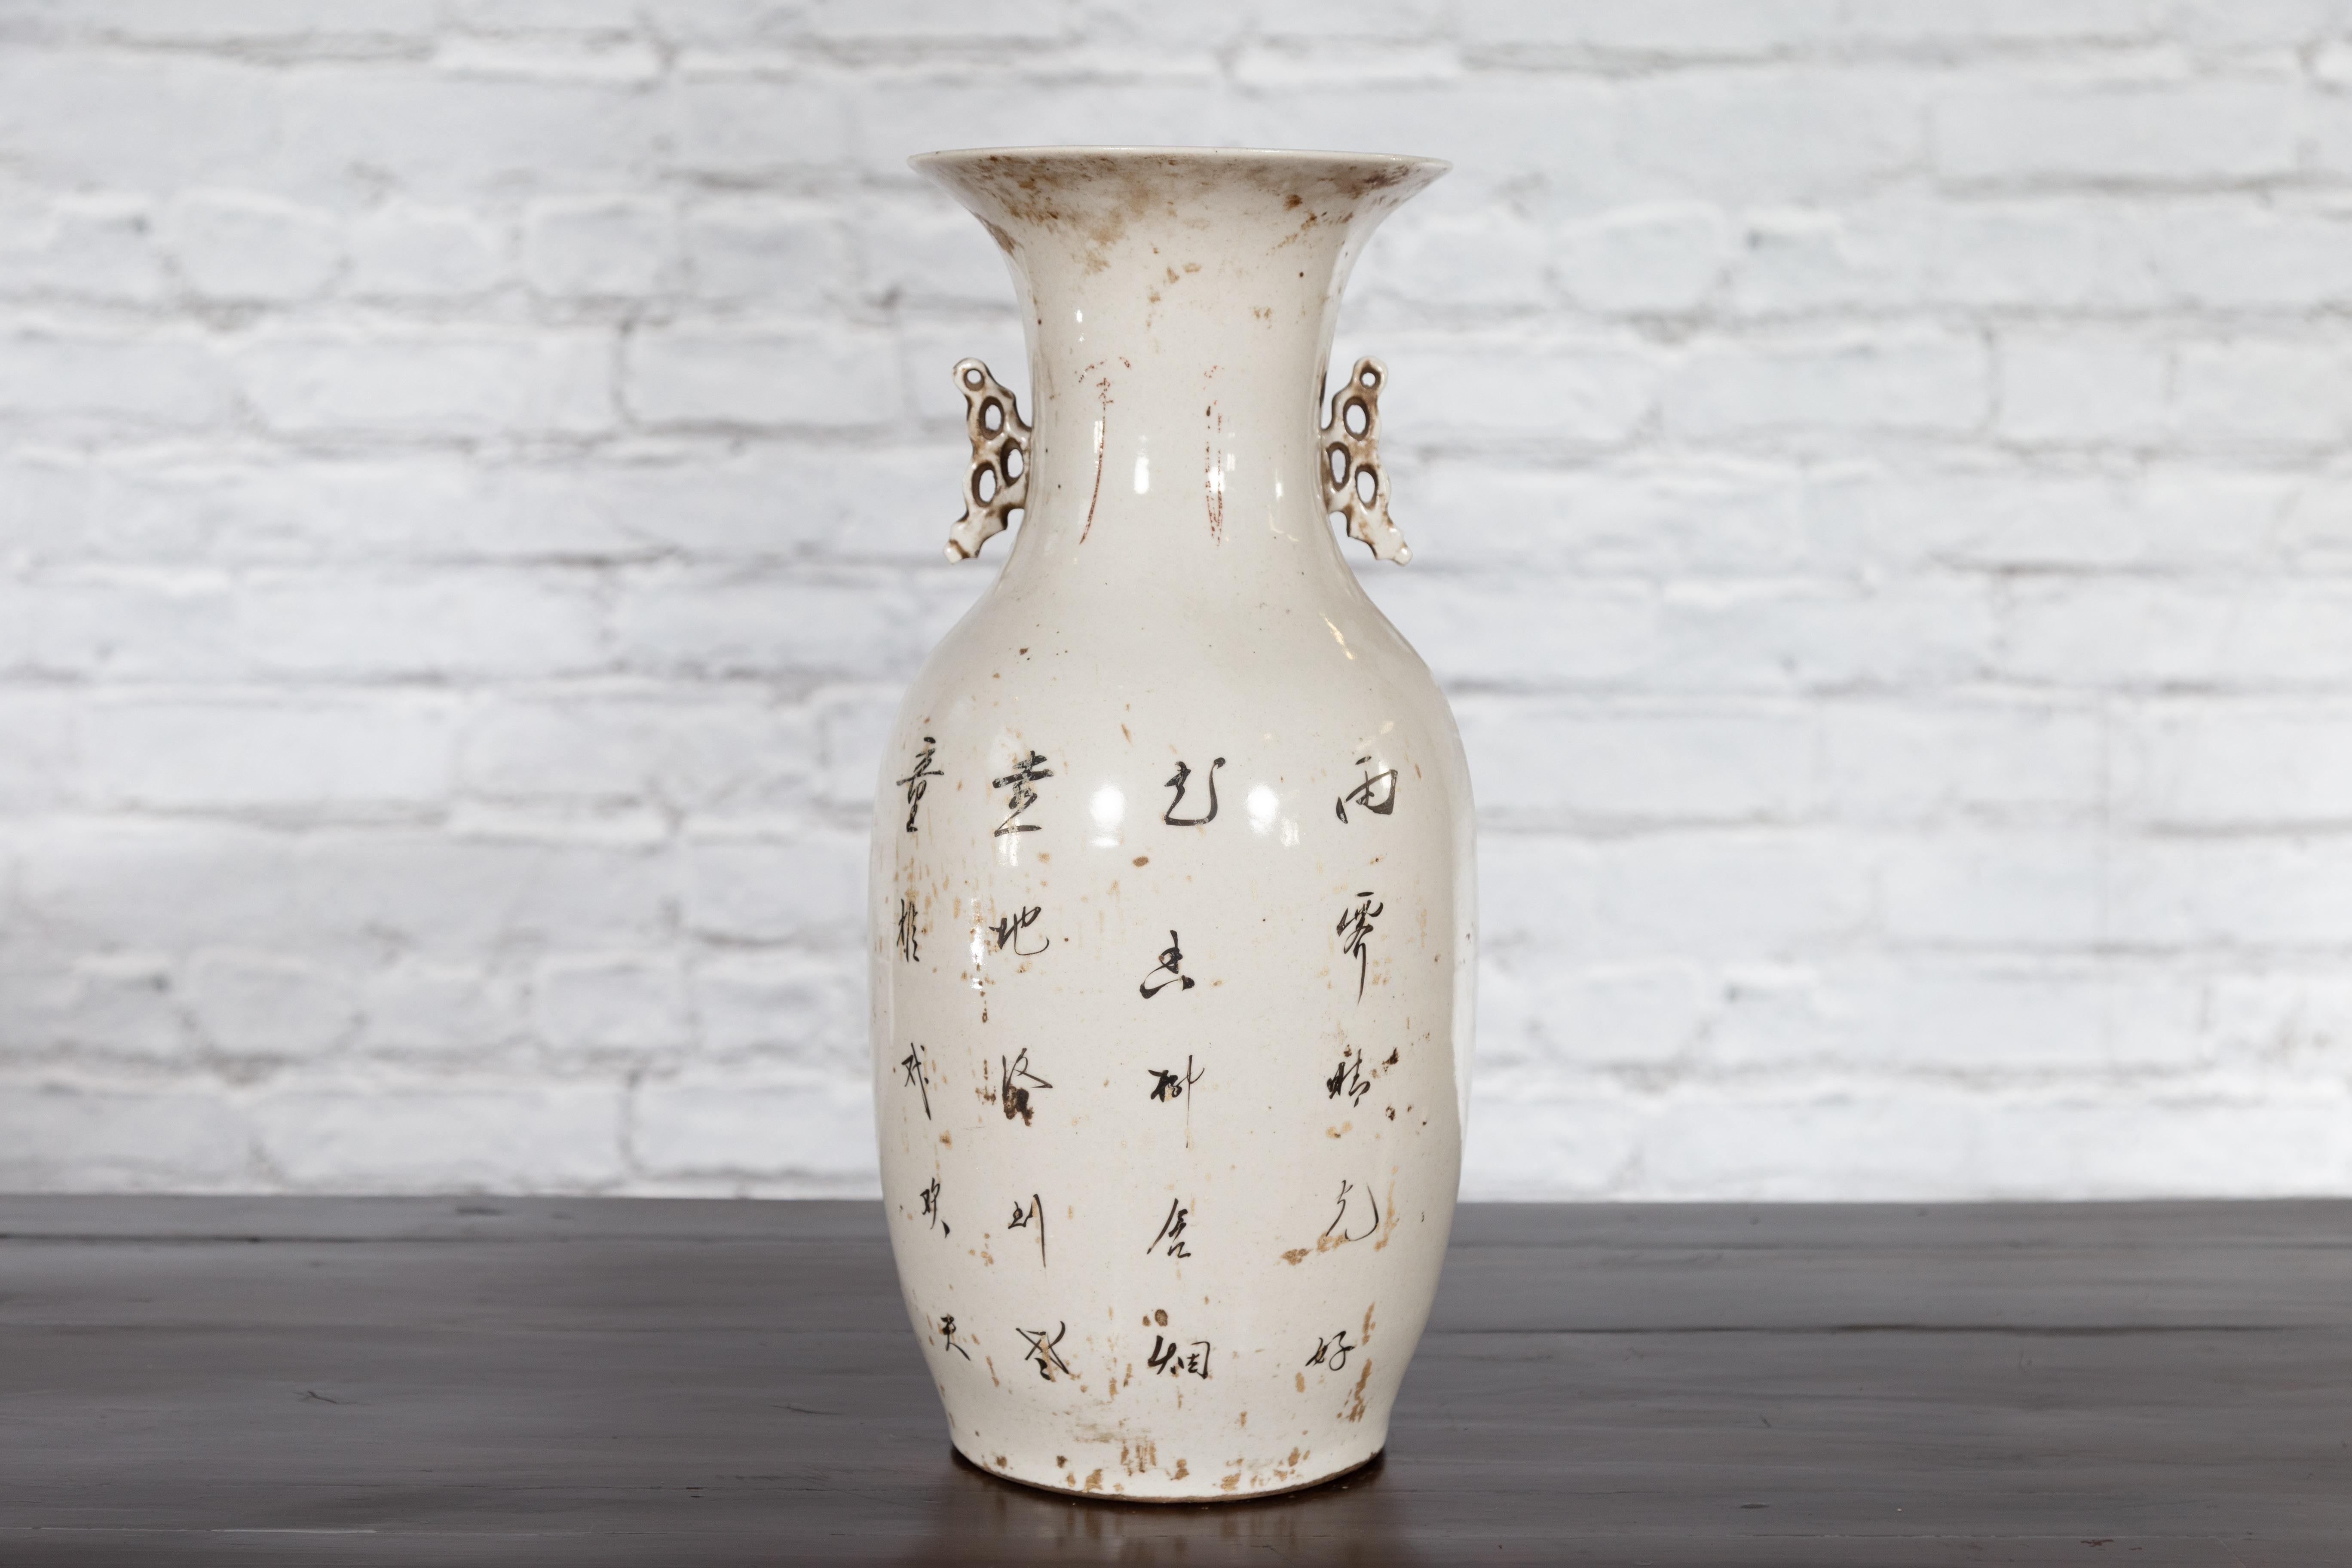 Chinese Porcelain Vase with Hand-Painted Figures and Calligraphy Motifs For Sale 6